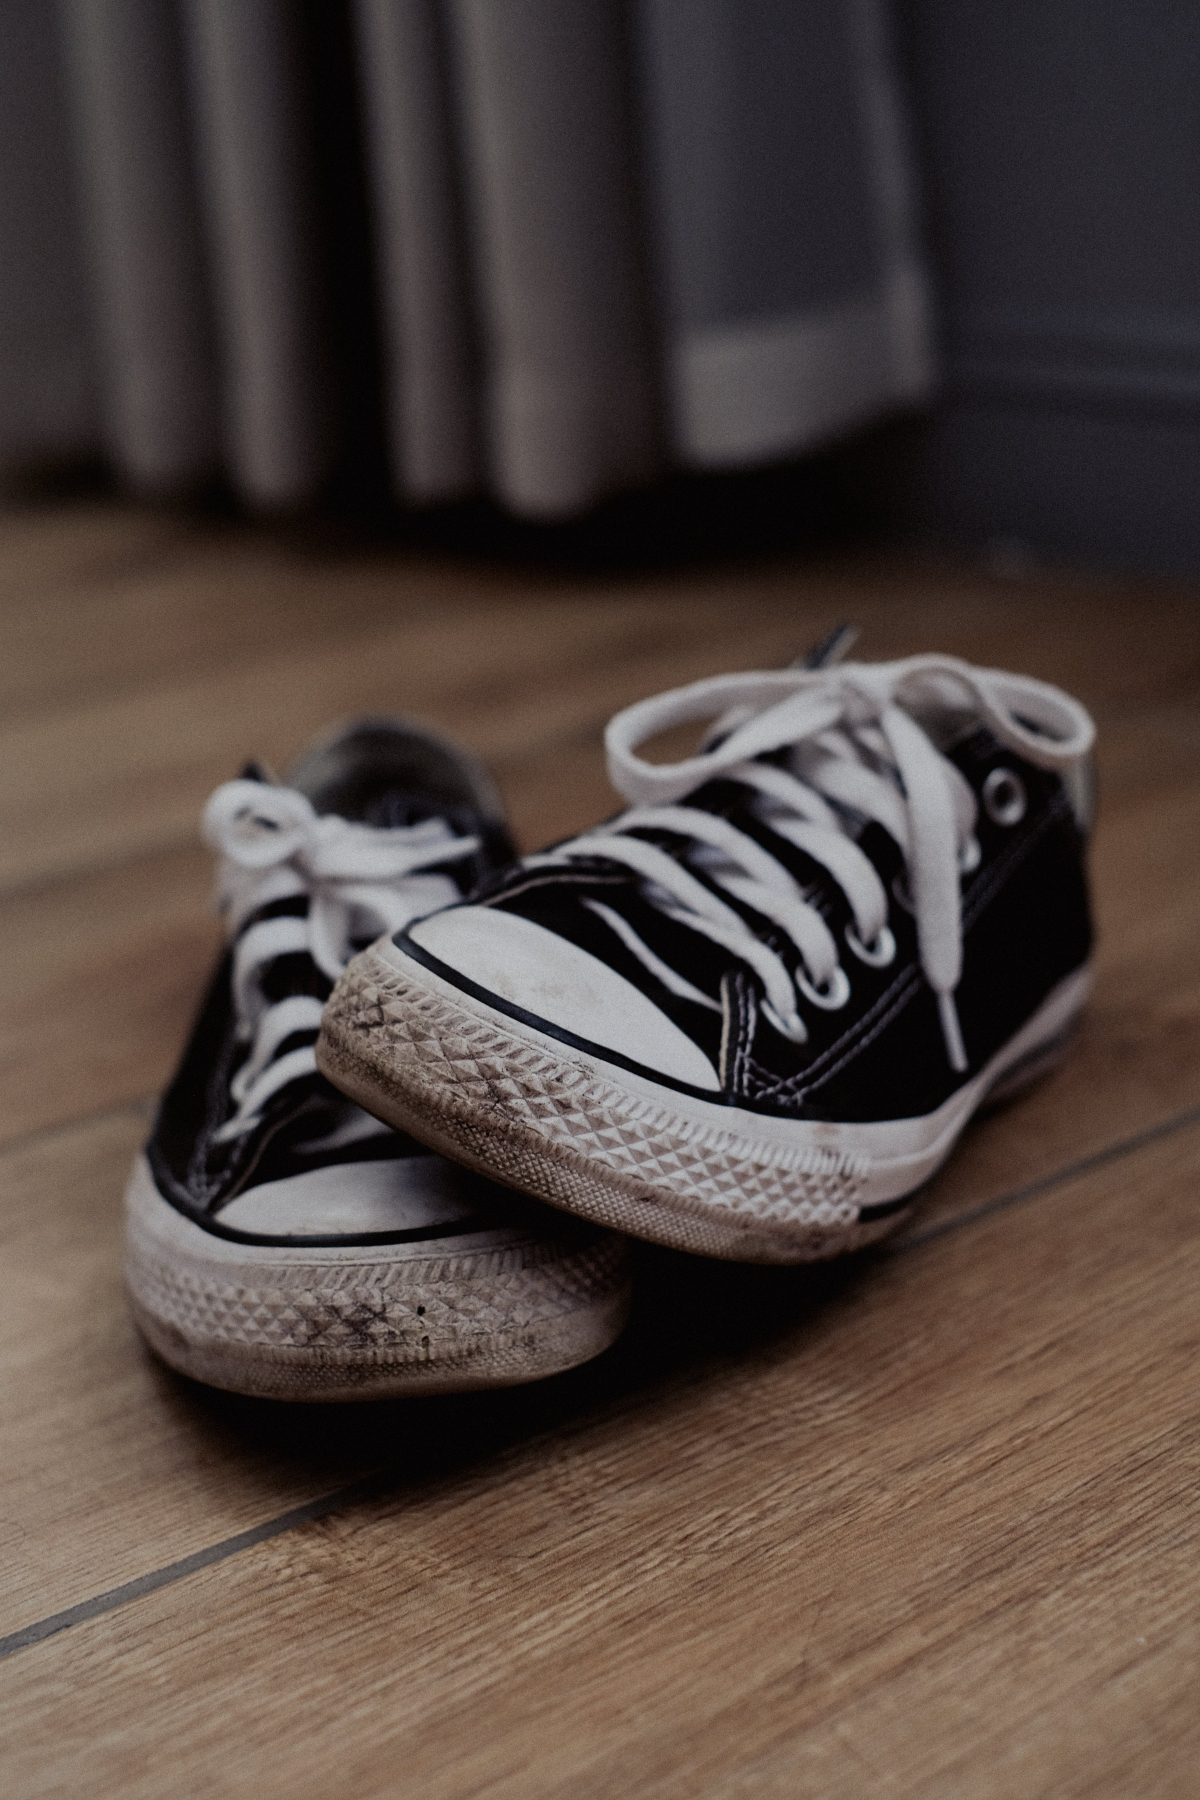 How to Clean Canvas Shoes